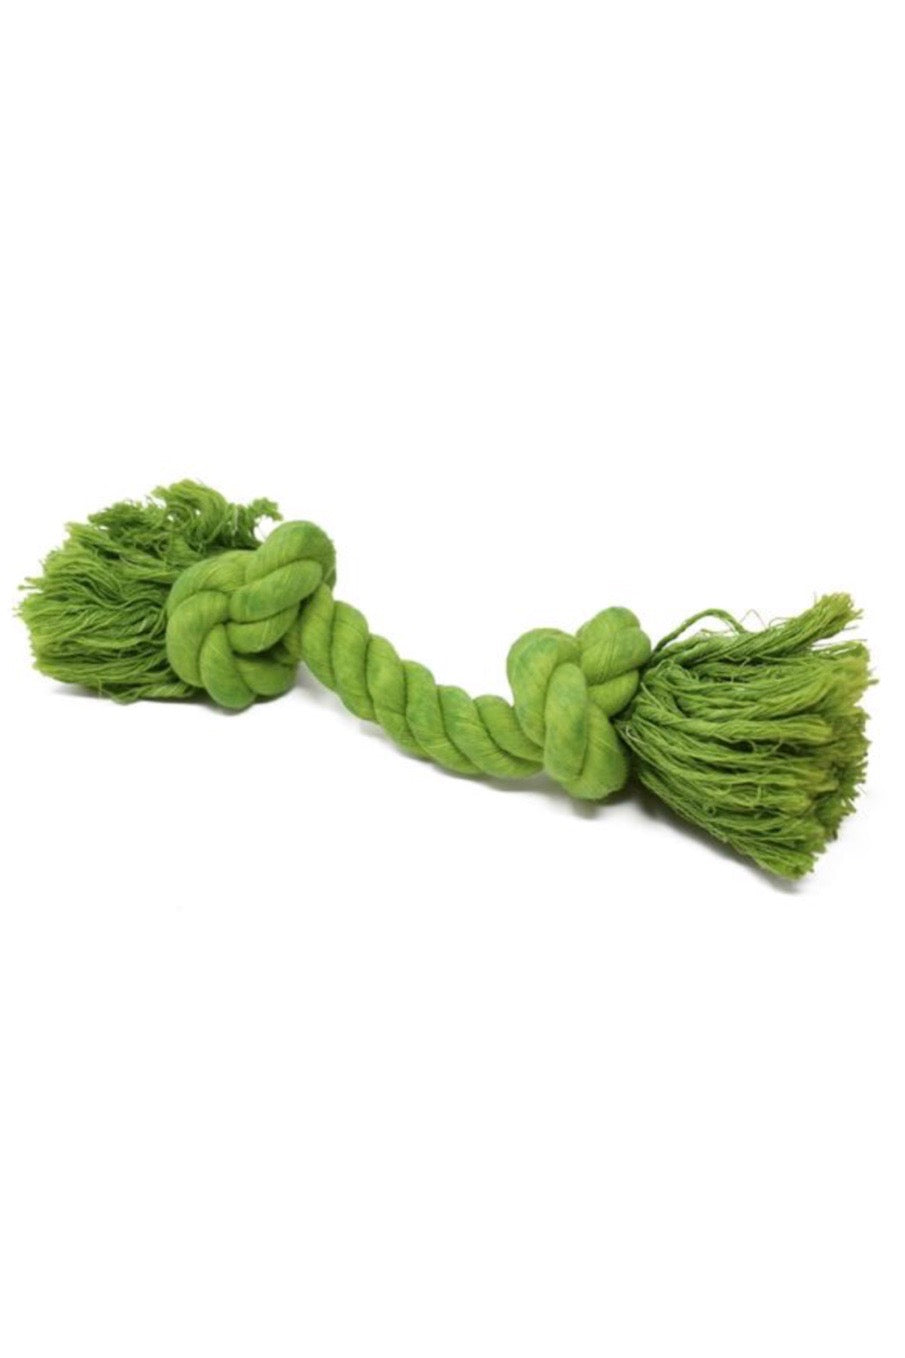 Dog Rope Toy Green Large